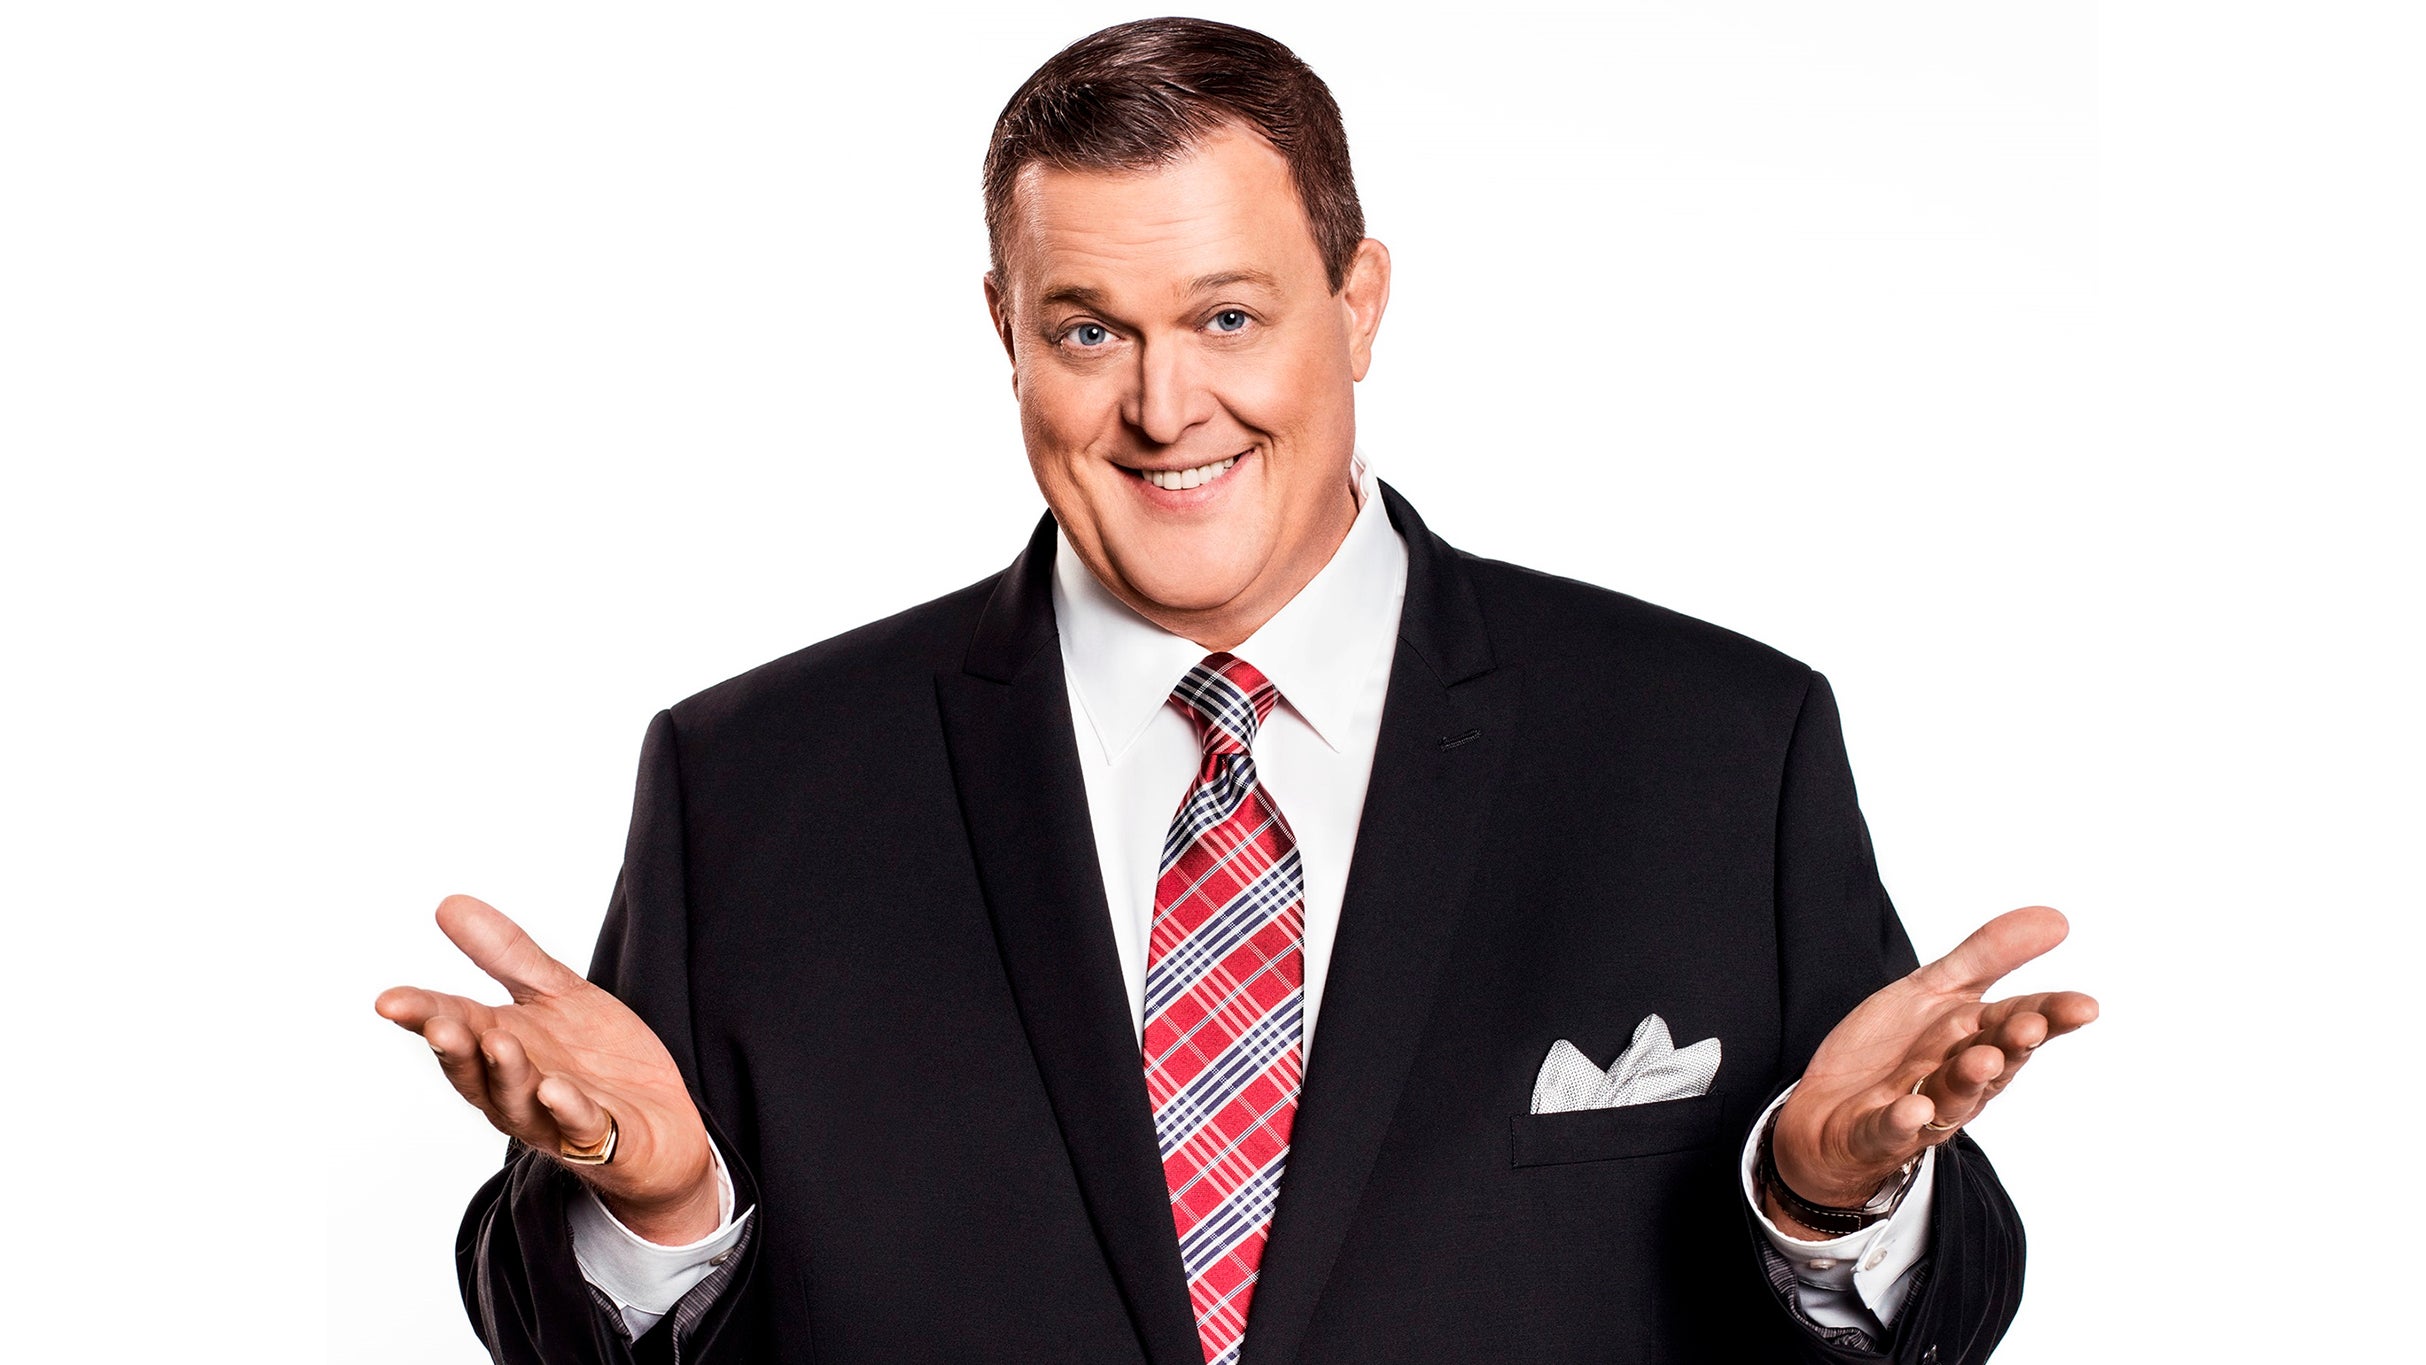 Billy Gardell in Boston promo photo for Official Platinum presale offer code